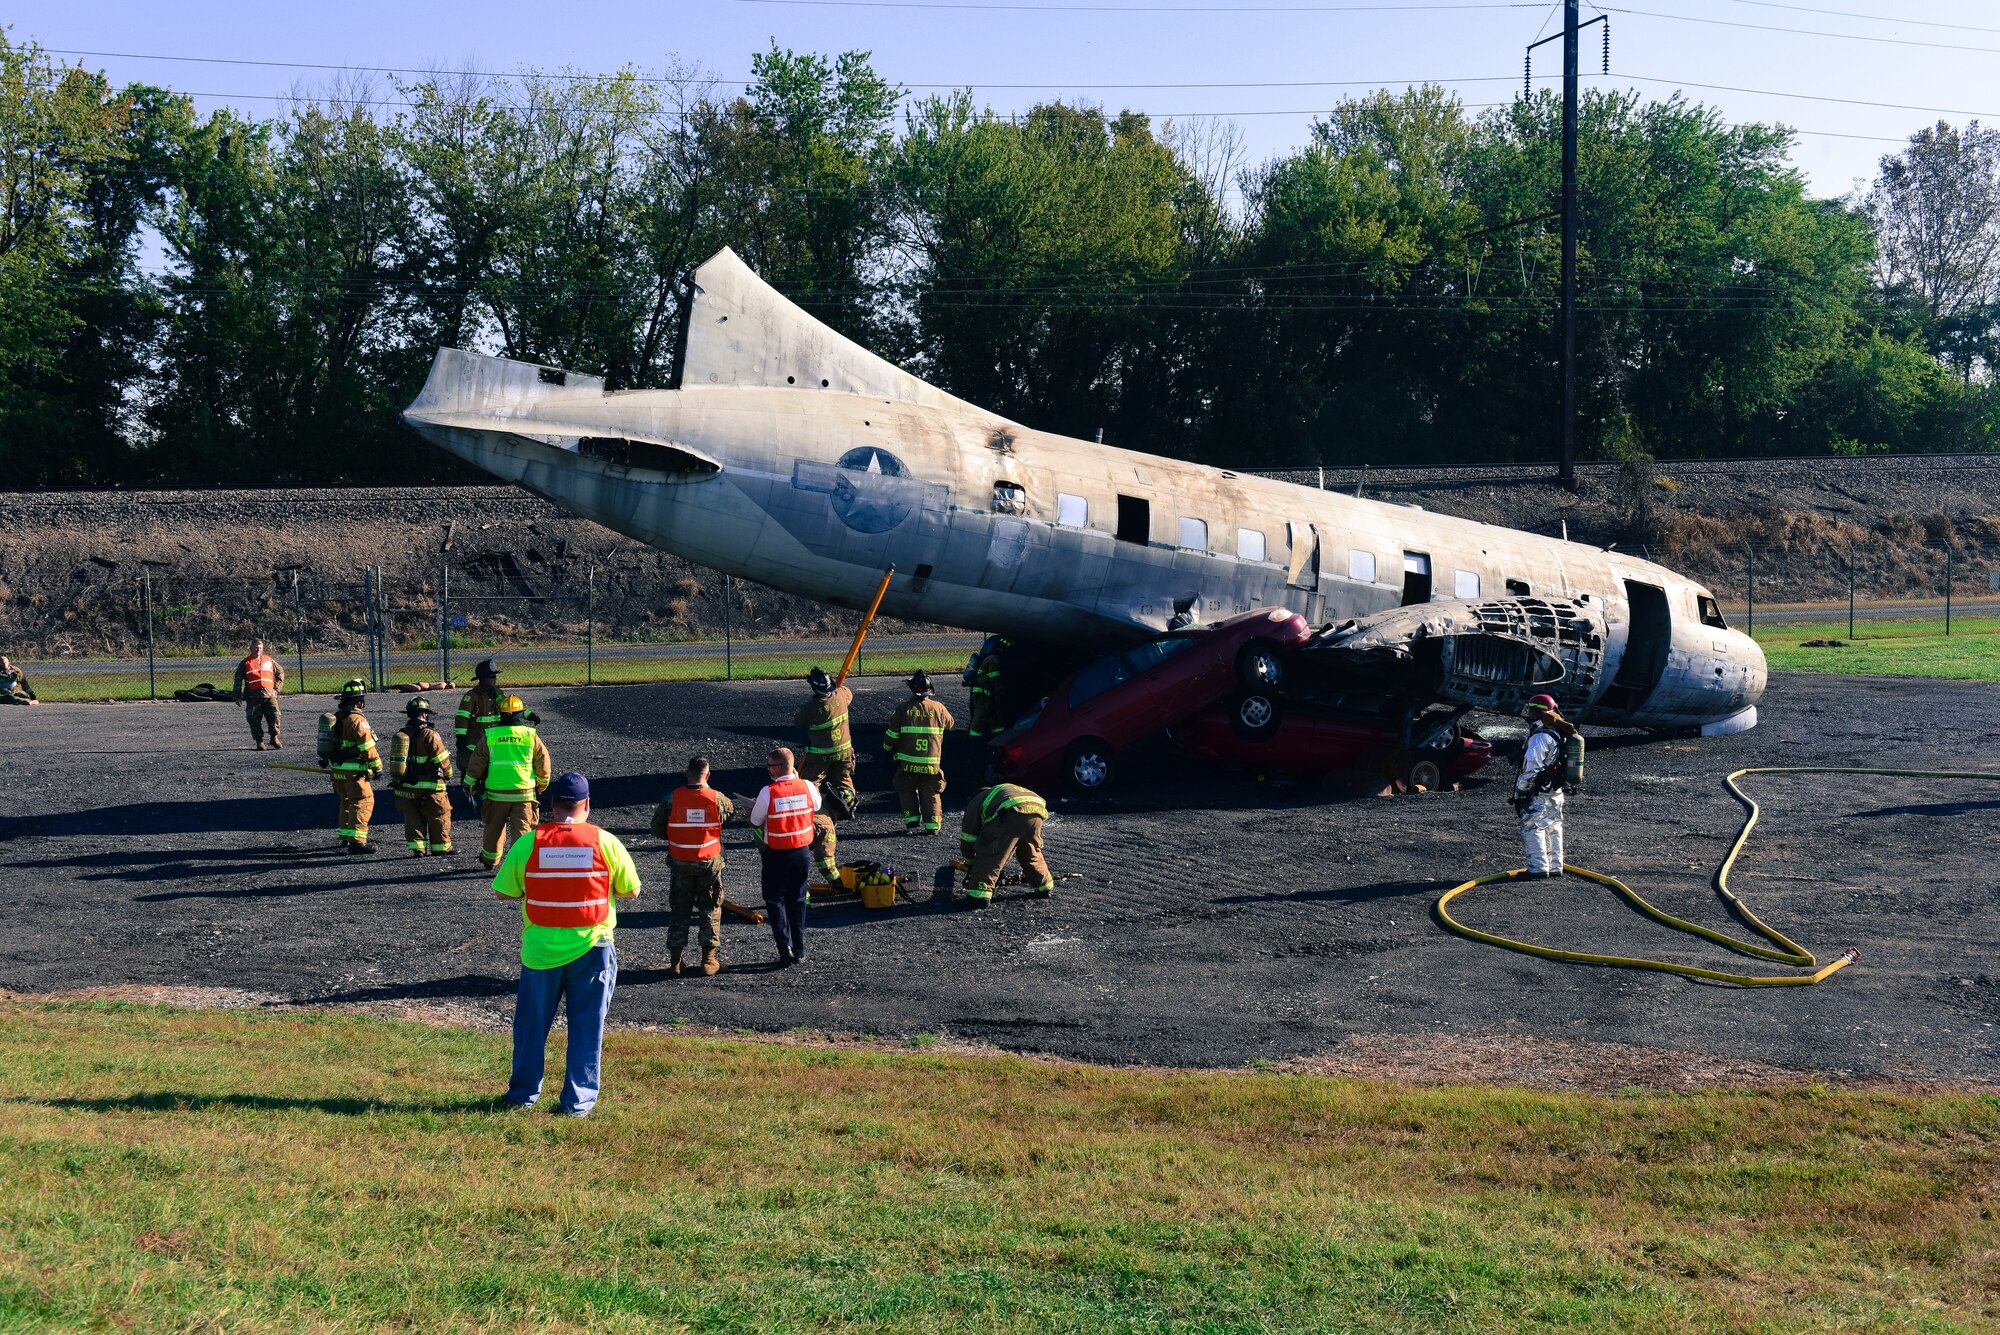 Firefighters from the 193rd Special Operations Civil Engineering Squadron, Cumberland, Dauphin, Lancaster and York counties participate in a simulated aircraft crash during an exercise held at the September 21, 2019, at Harrisburg International Airport, in Middletown, Pennsylvania.